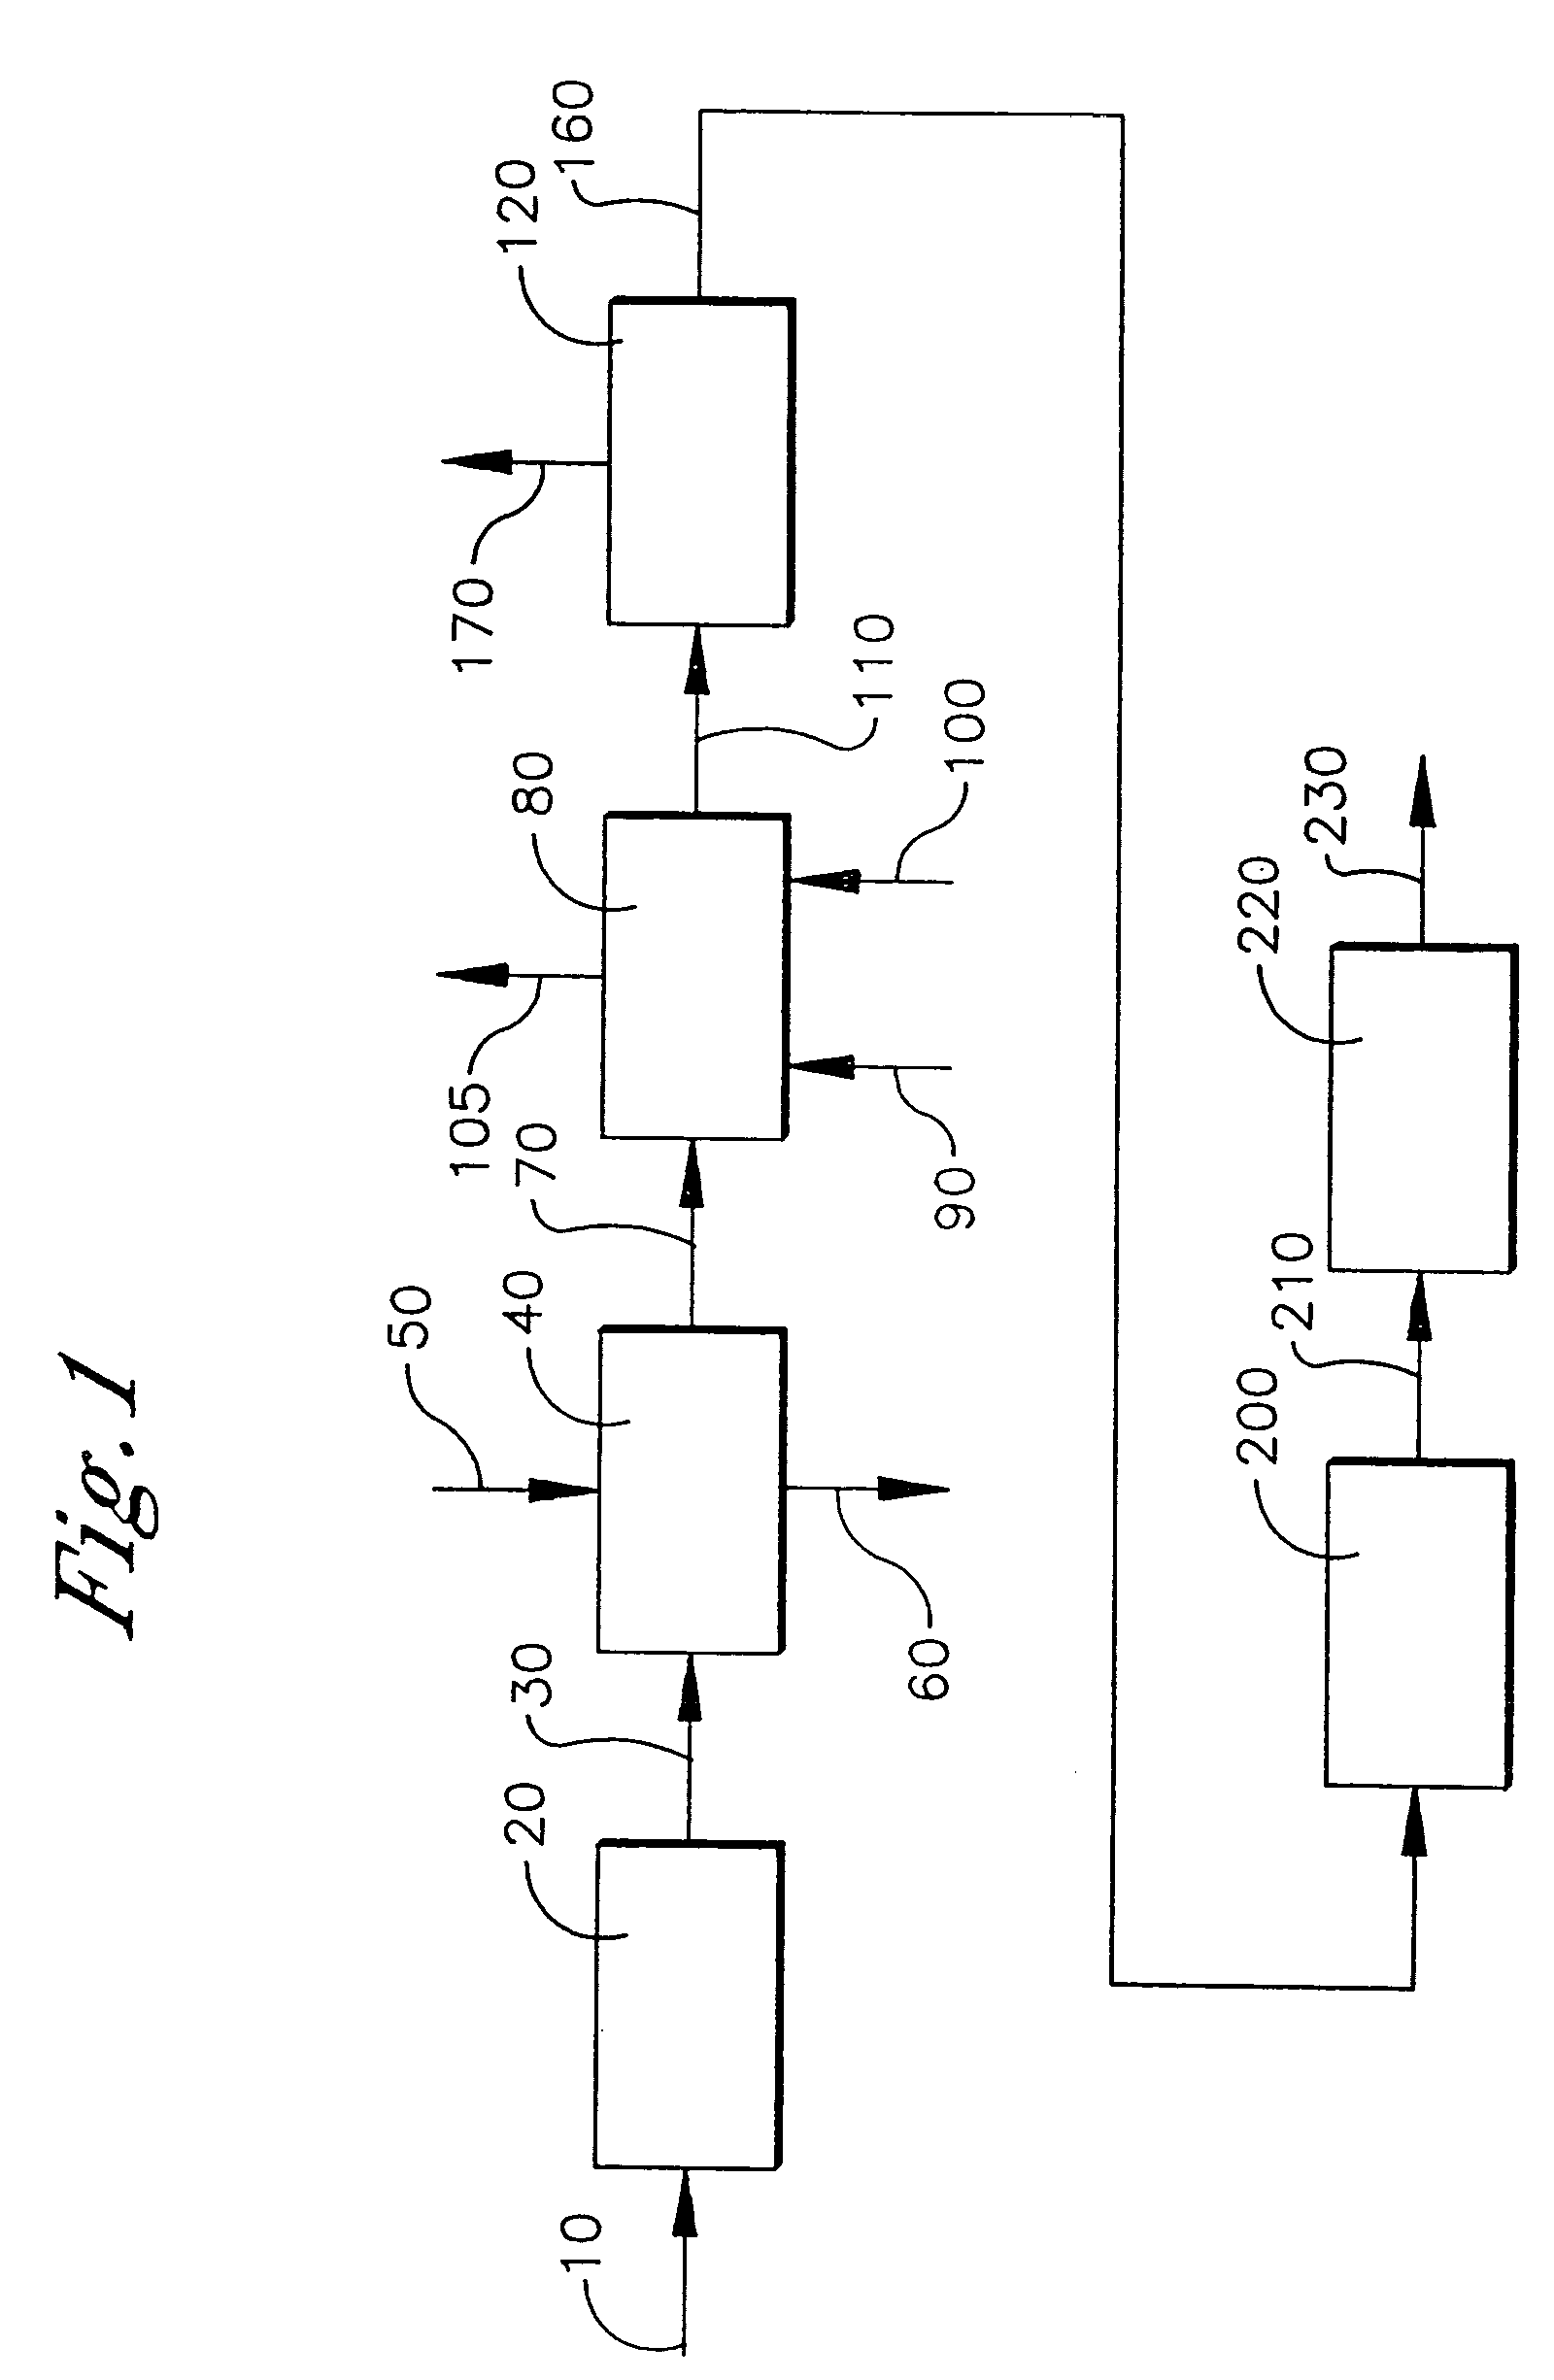 Process for the purification of a crude carboxylic acid slurry